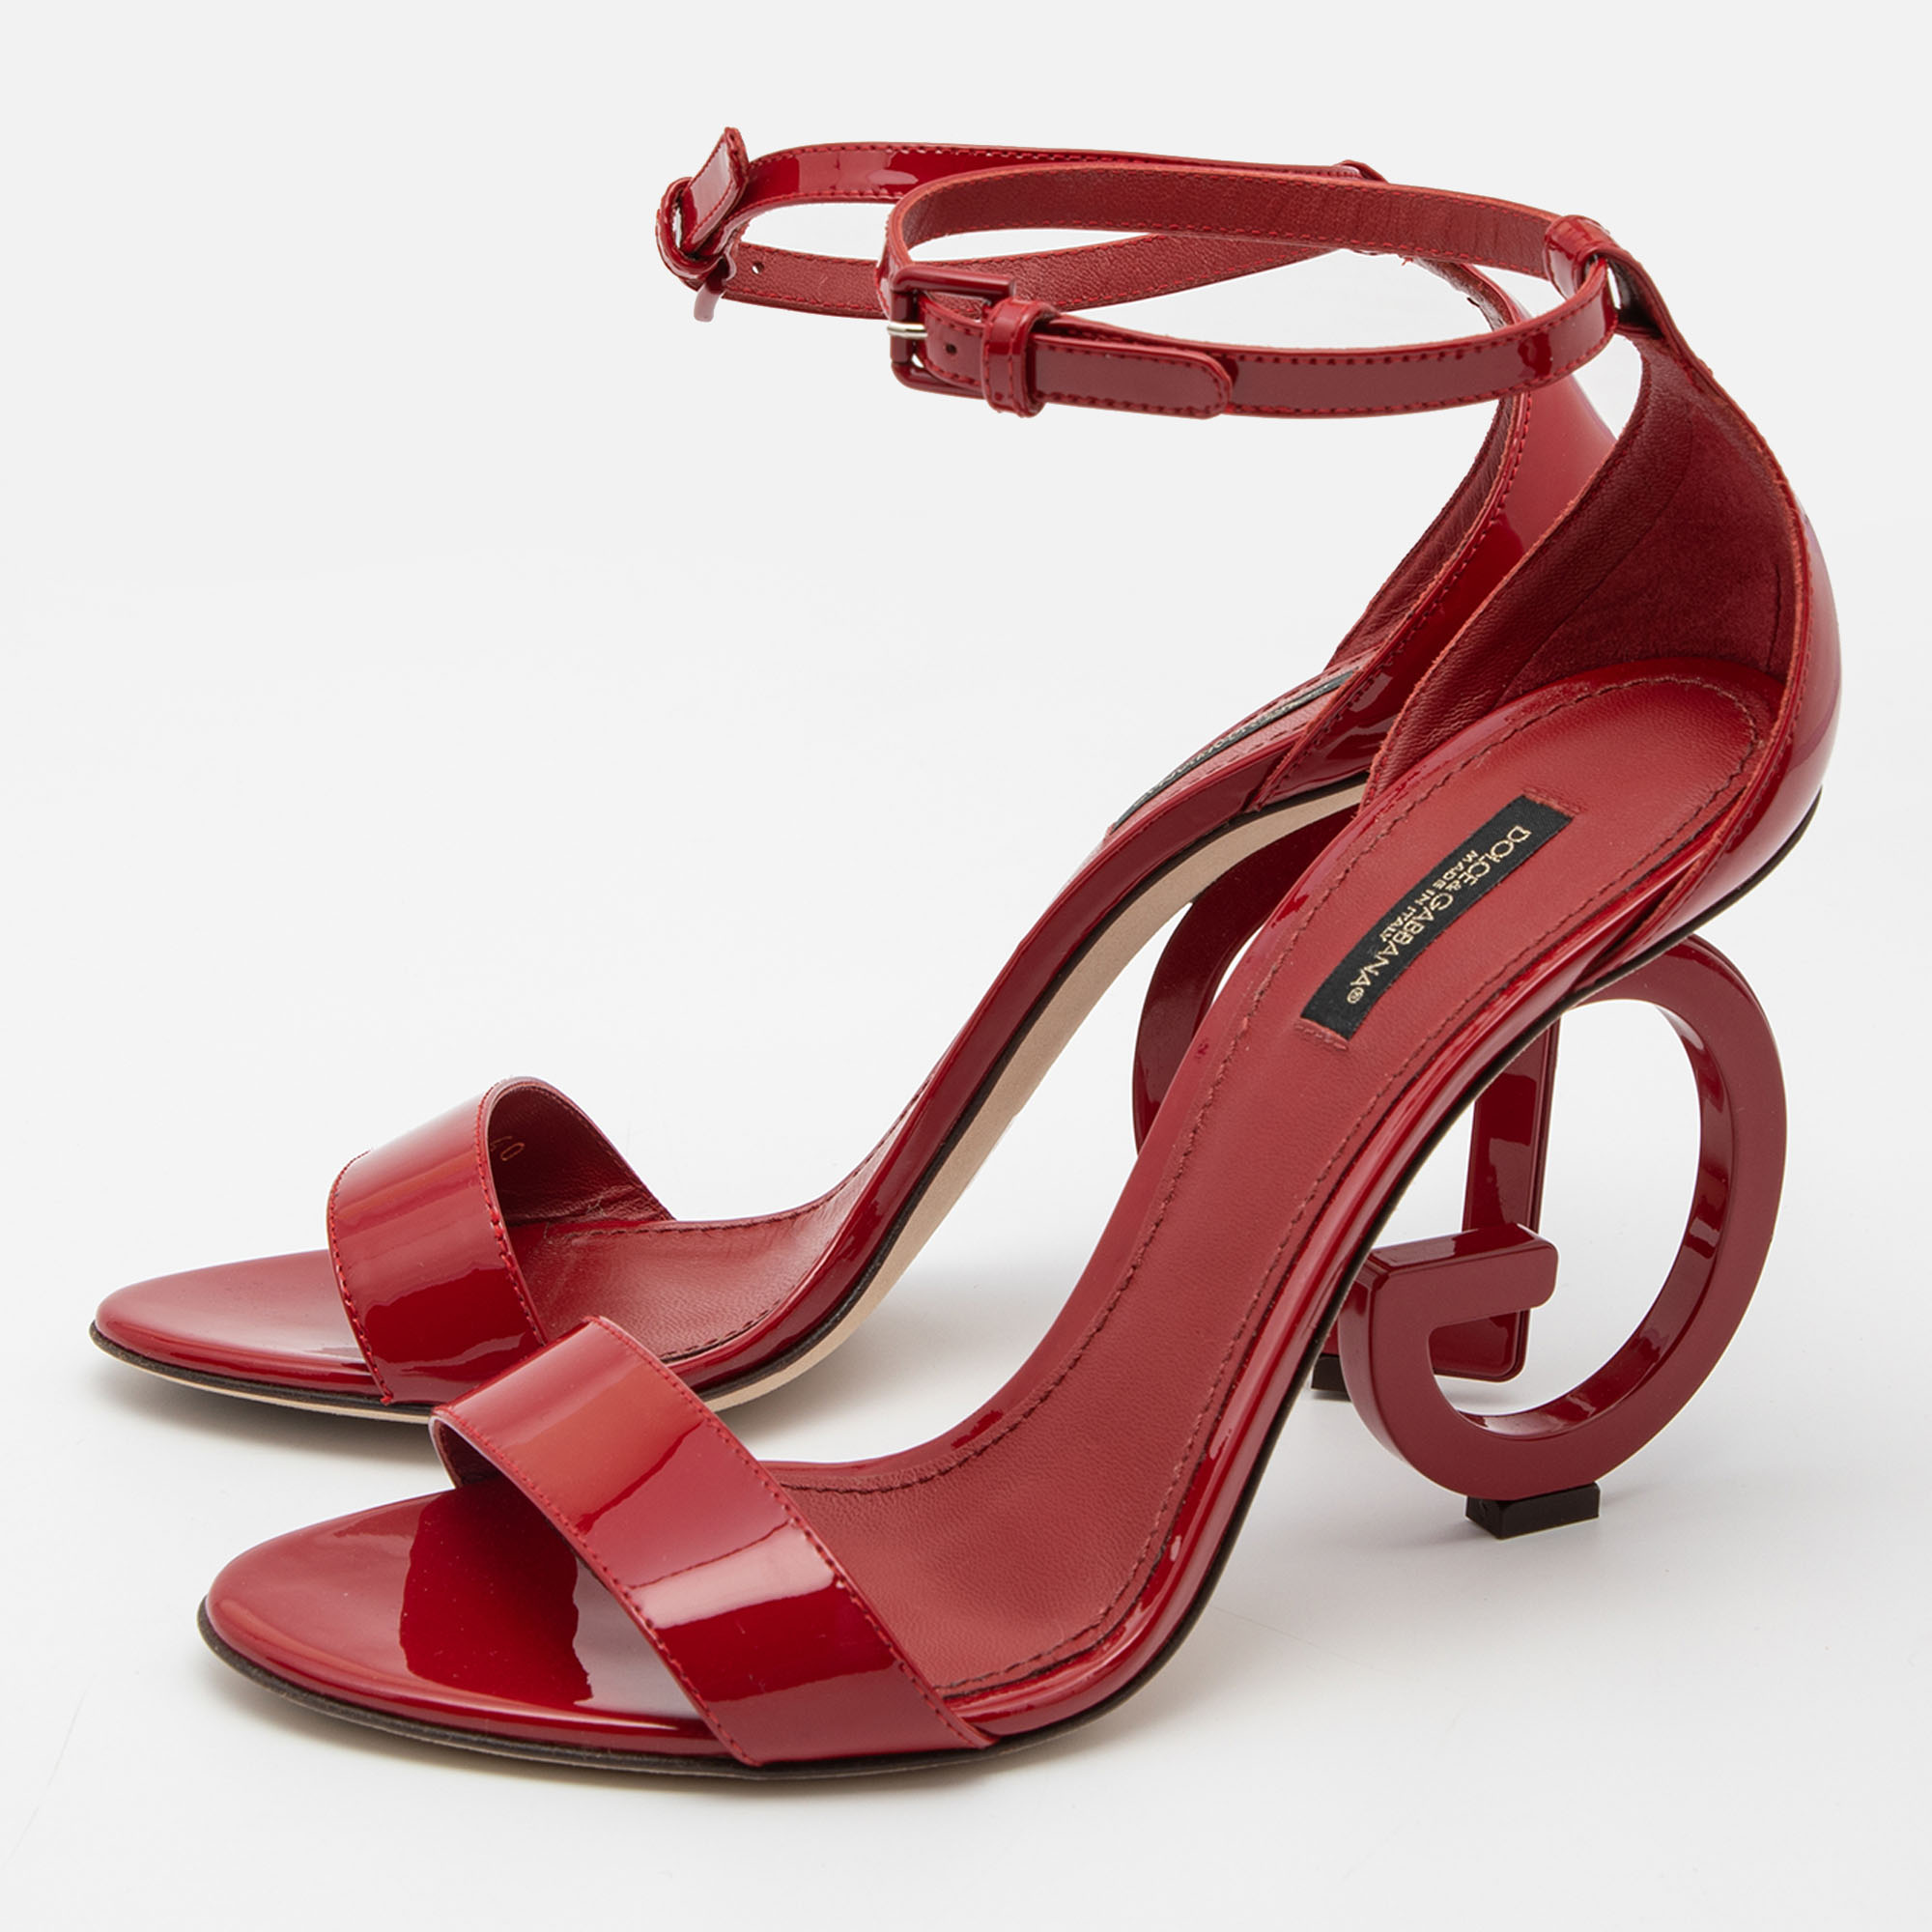 

Dolce & Gabbana Red Patent Leather DG Heel Sandals Size